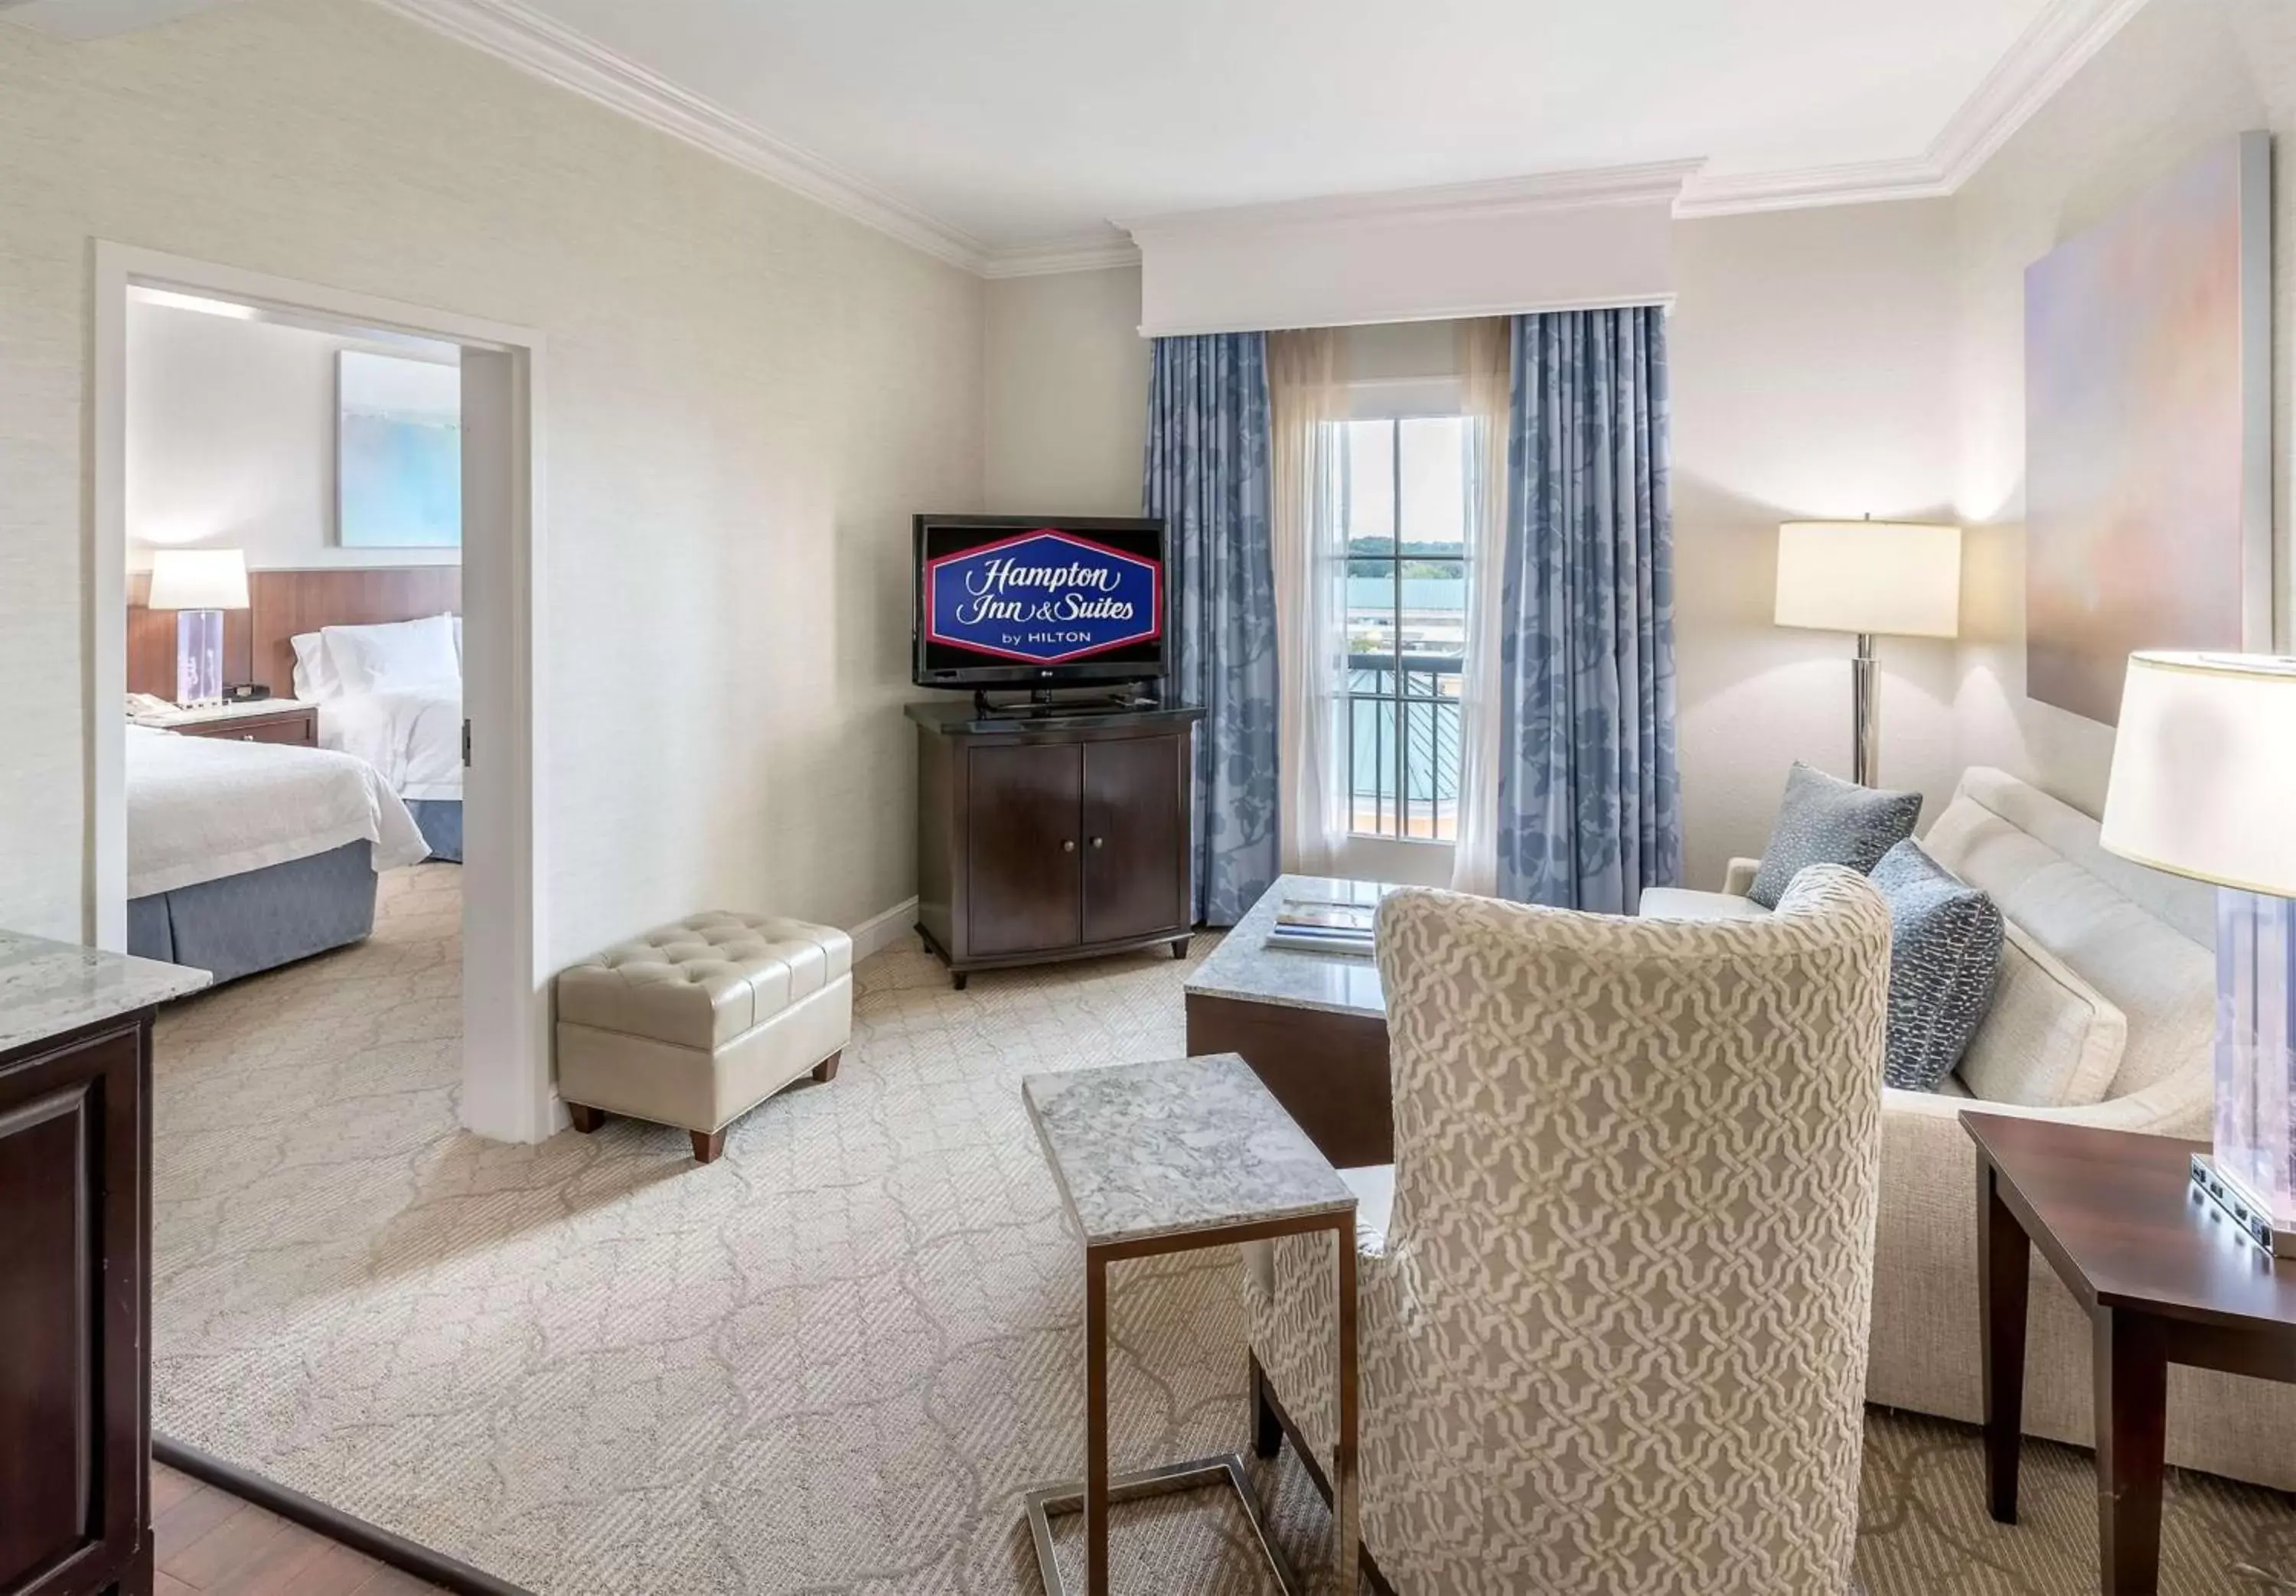 Bedroom, TV/Entertainment Center in Hampton Inn & Suites South Park at Phillips Place